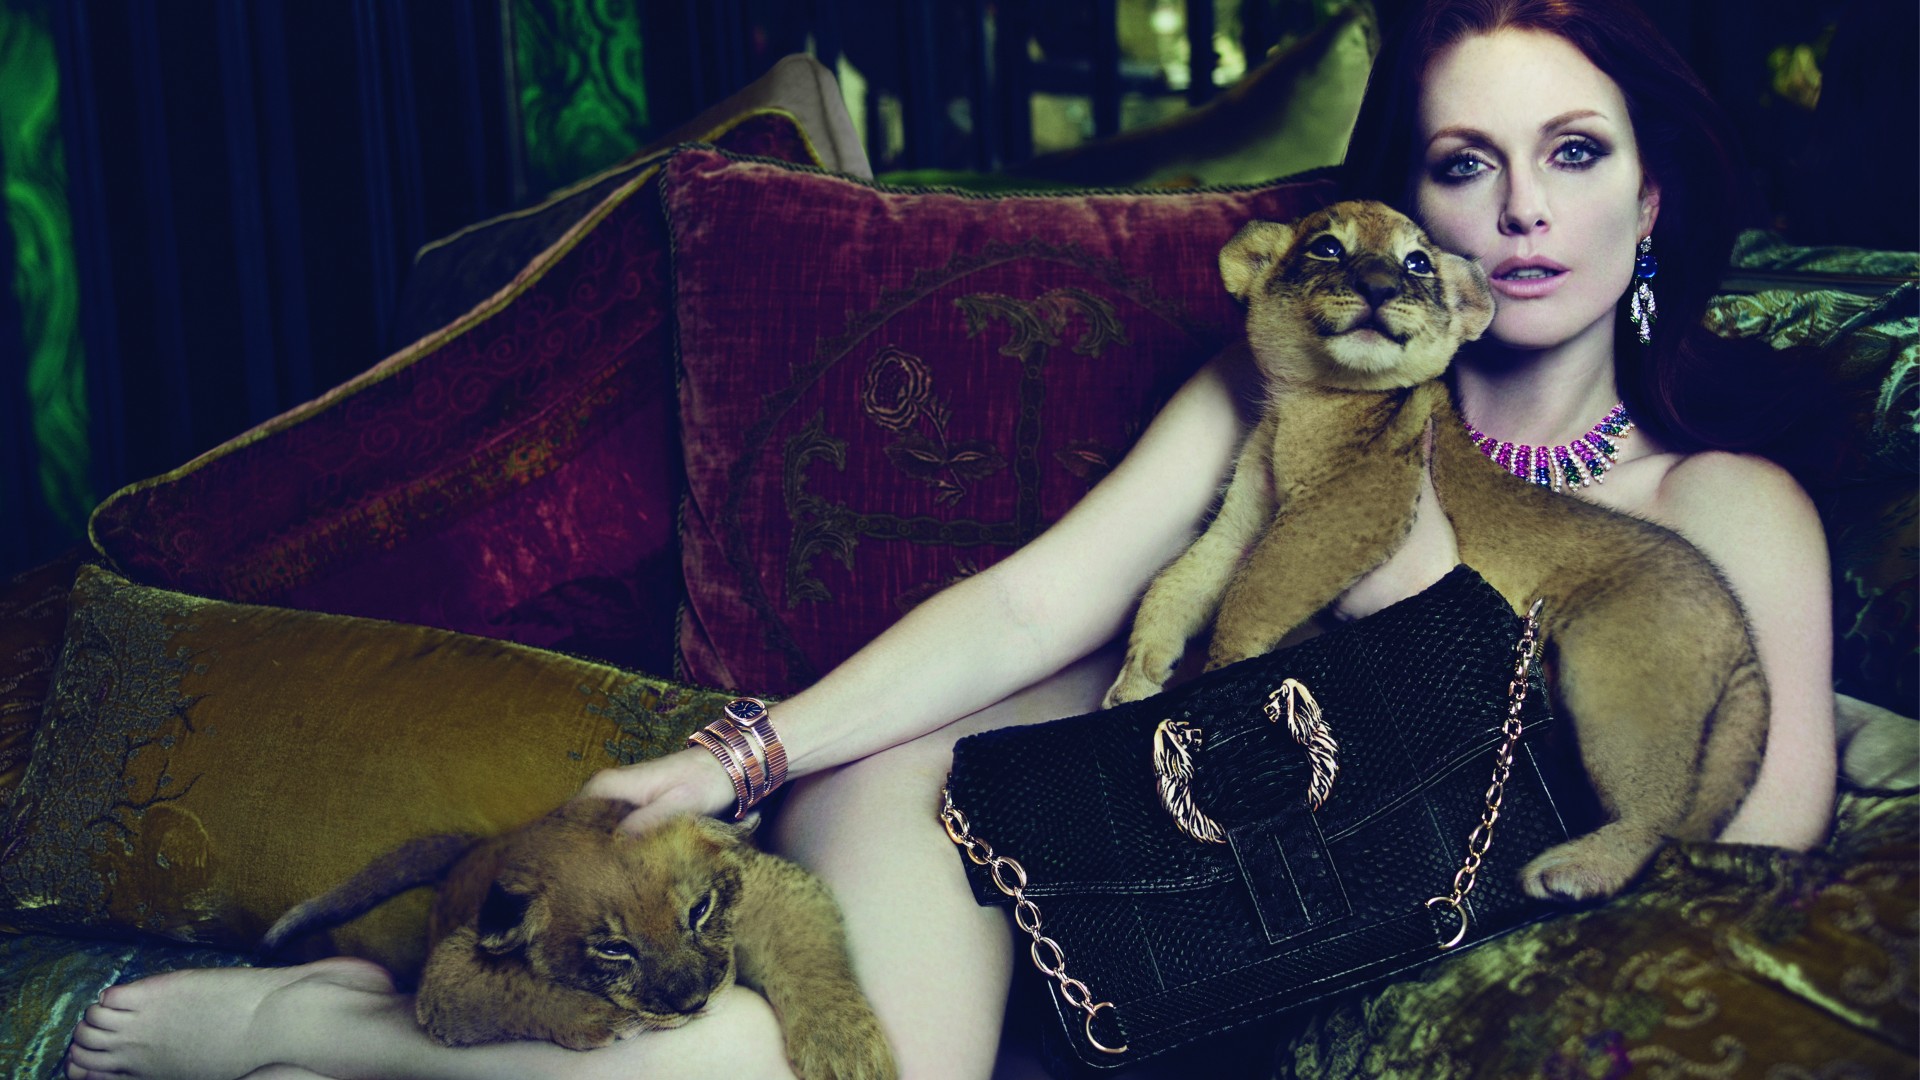 Julianne Moore, Julie Anne Smith, Actress, model, sofa, red hair, lion, cub, look, room, interior (horizontal)